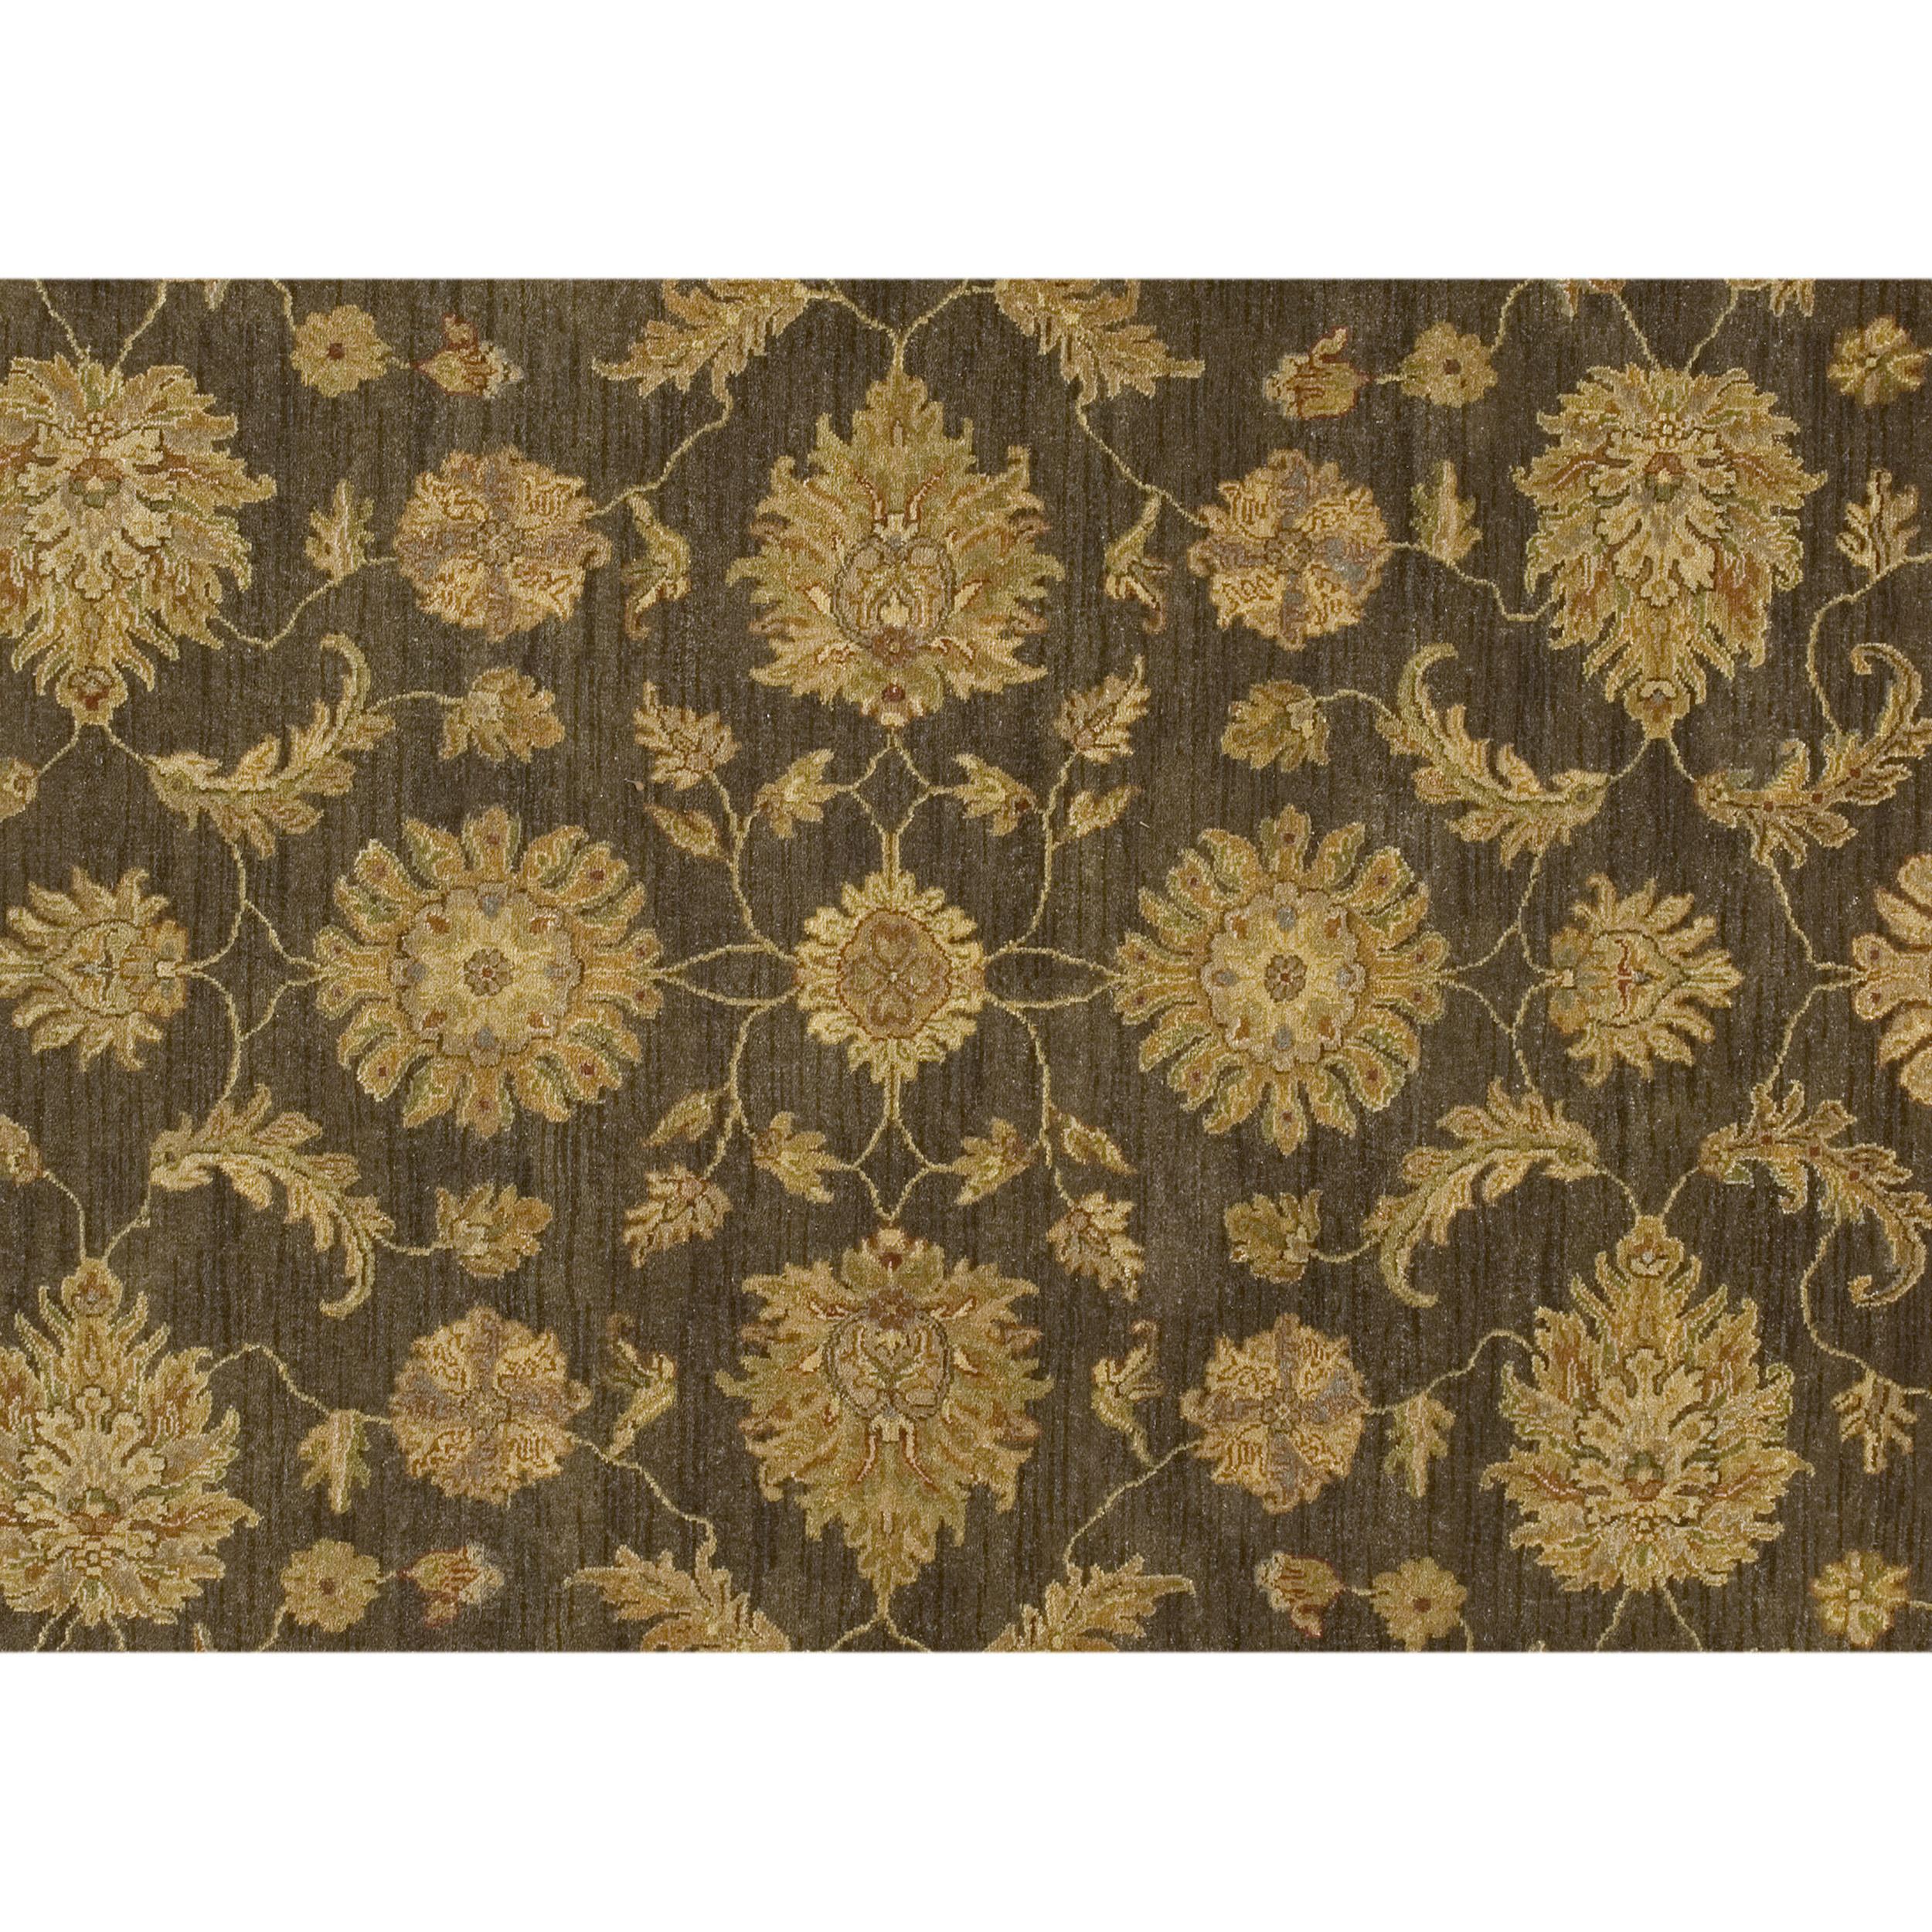 Agra Luxury Traditional Hand-Knotted Amritsar Ziegler Brown/Beige 14x28 Rug For Sale